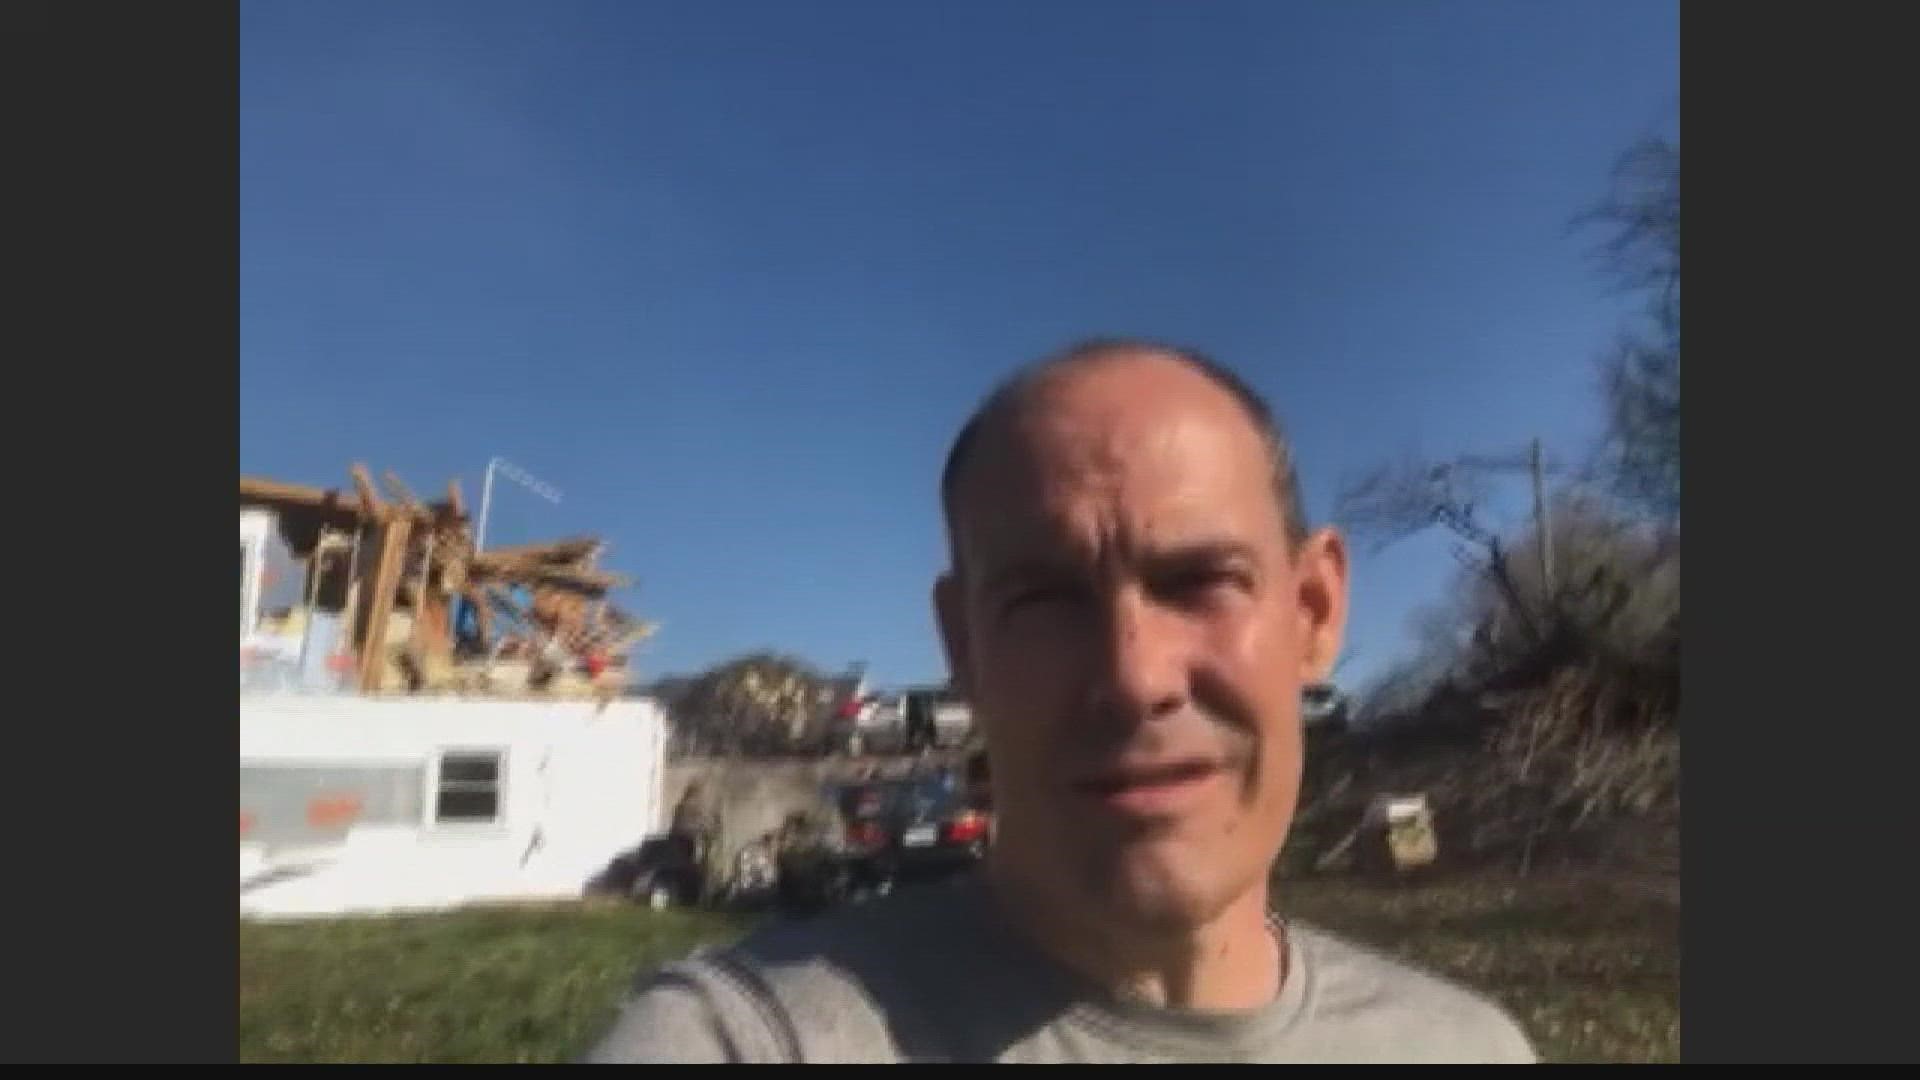 David Lytle went to Bowling Green with his family to help in the aftermath of the devastating tornadoes.